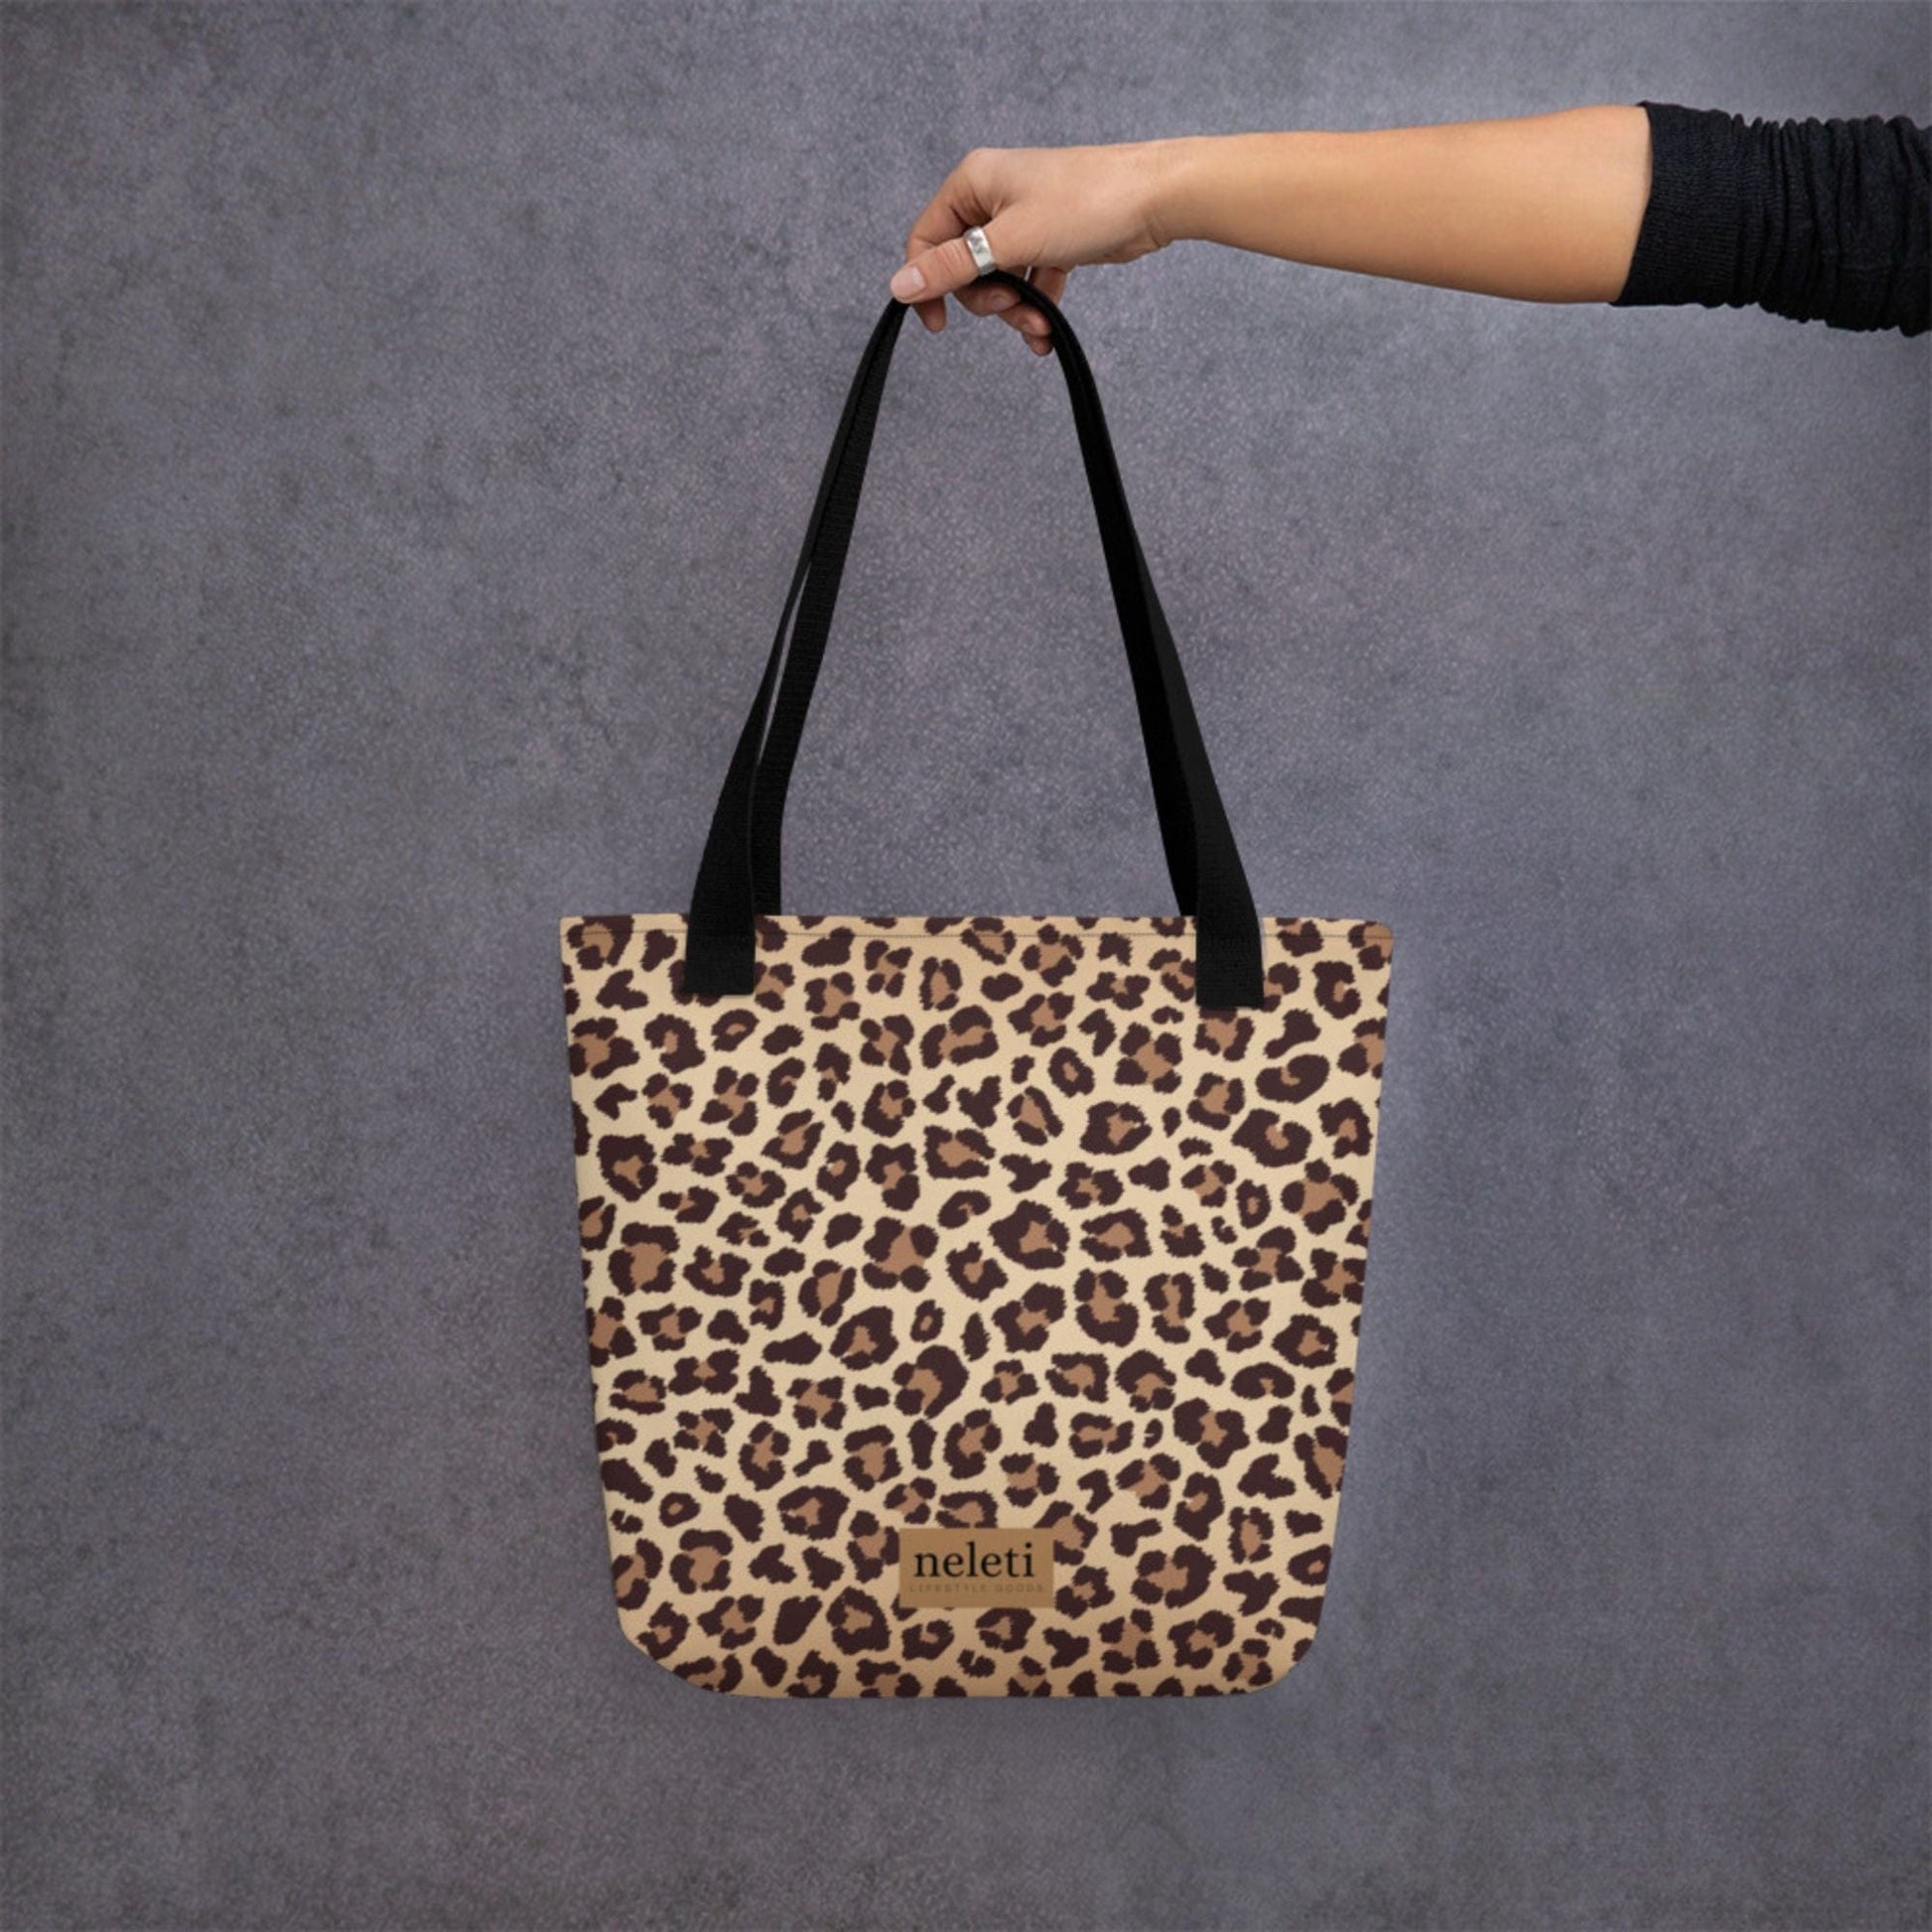 neleti.com-tote-bag-for-women-with-leopard-print